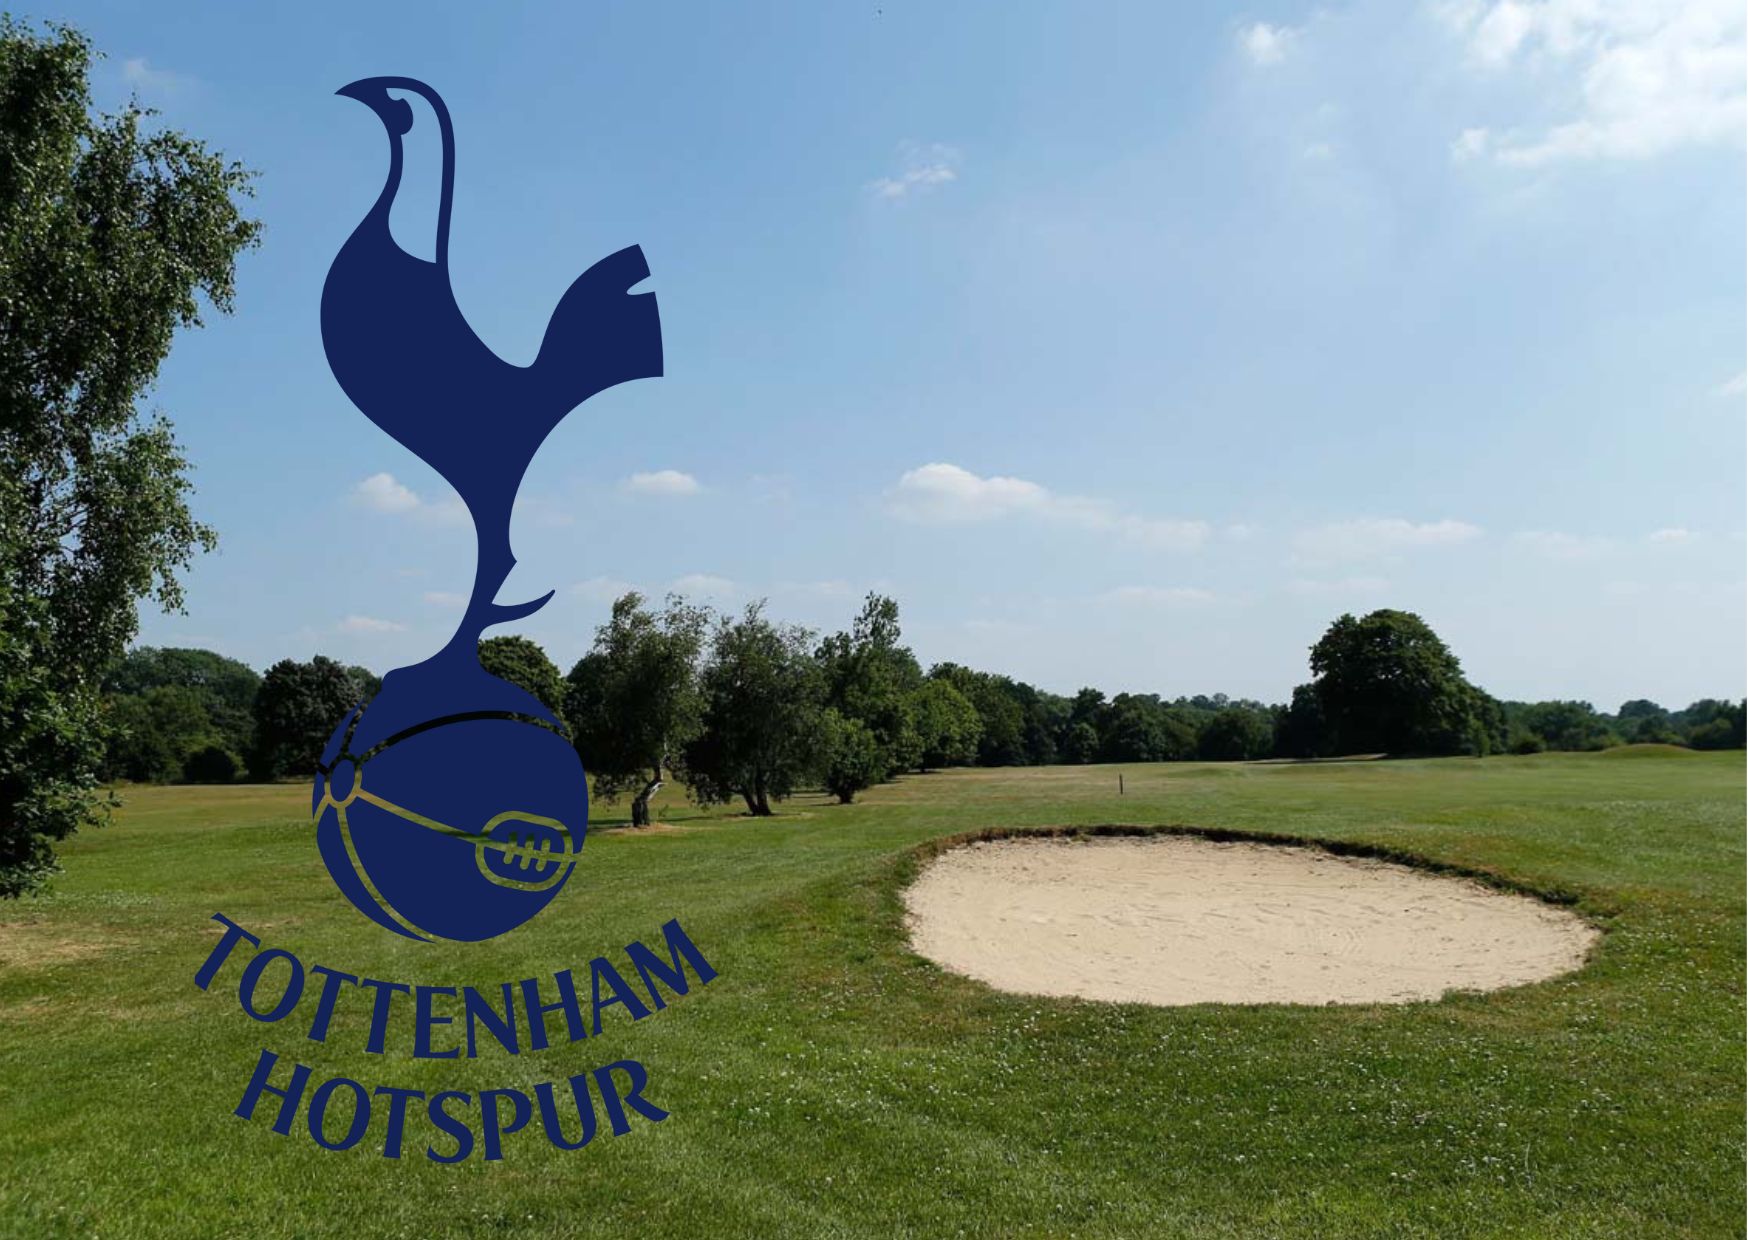 Tottenham Hotspur was chosen last year as the preferred bidder to lease the now-closed Whitewebbs Park Golf Couse